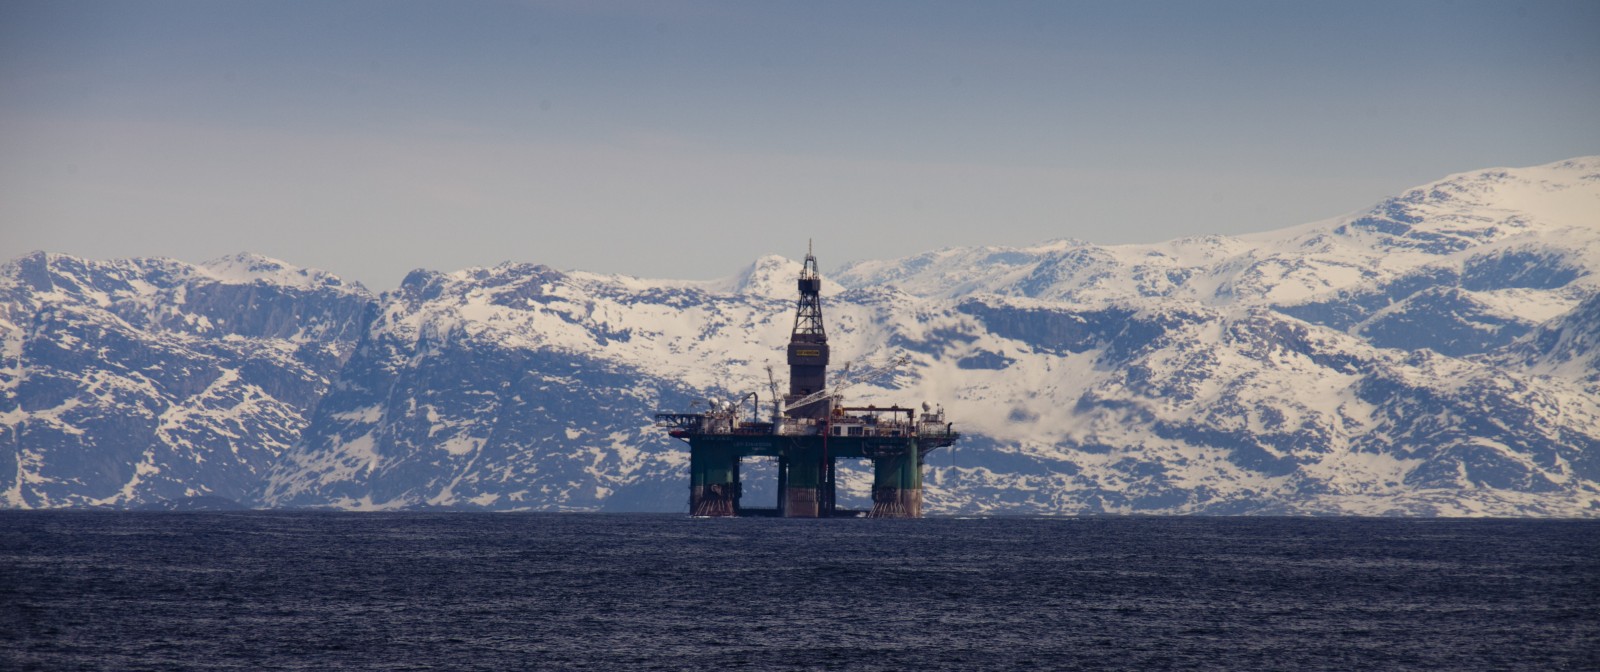 Arctic oil drilling, carbon emissions, oil spills, Shell Arctic drilling, drilling leases, Sally Jewell